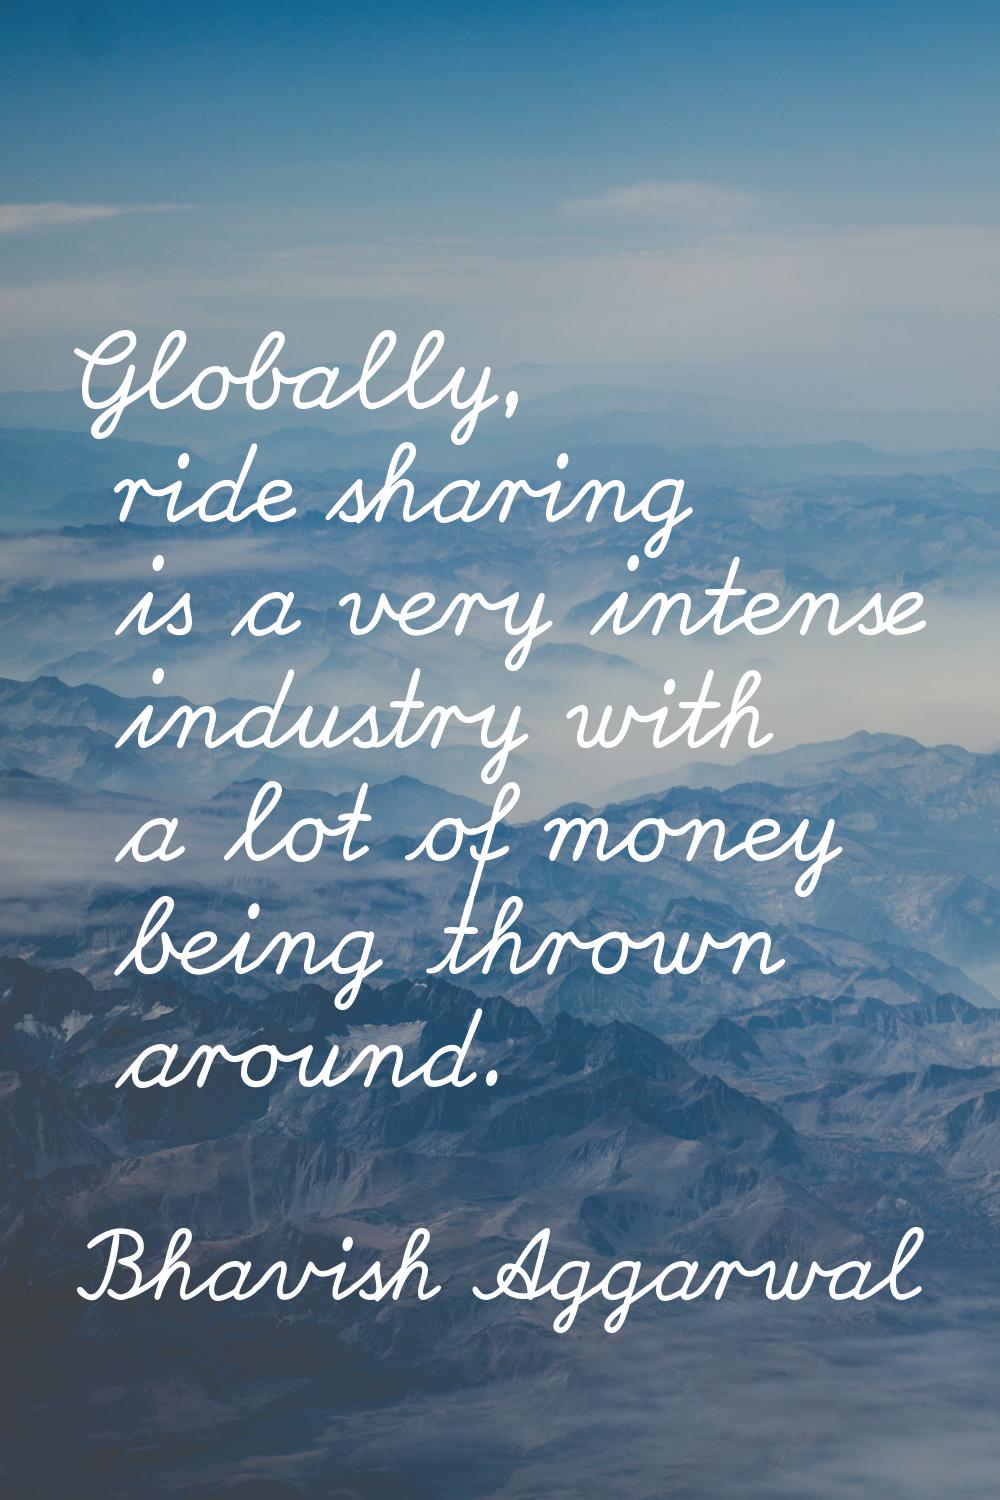 Globally, ride sharing is a very intense industry with a lot of money being thrown around.